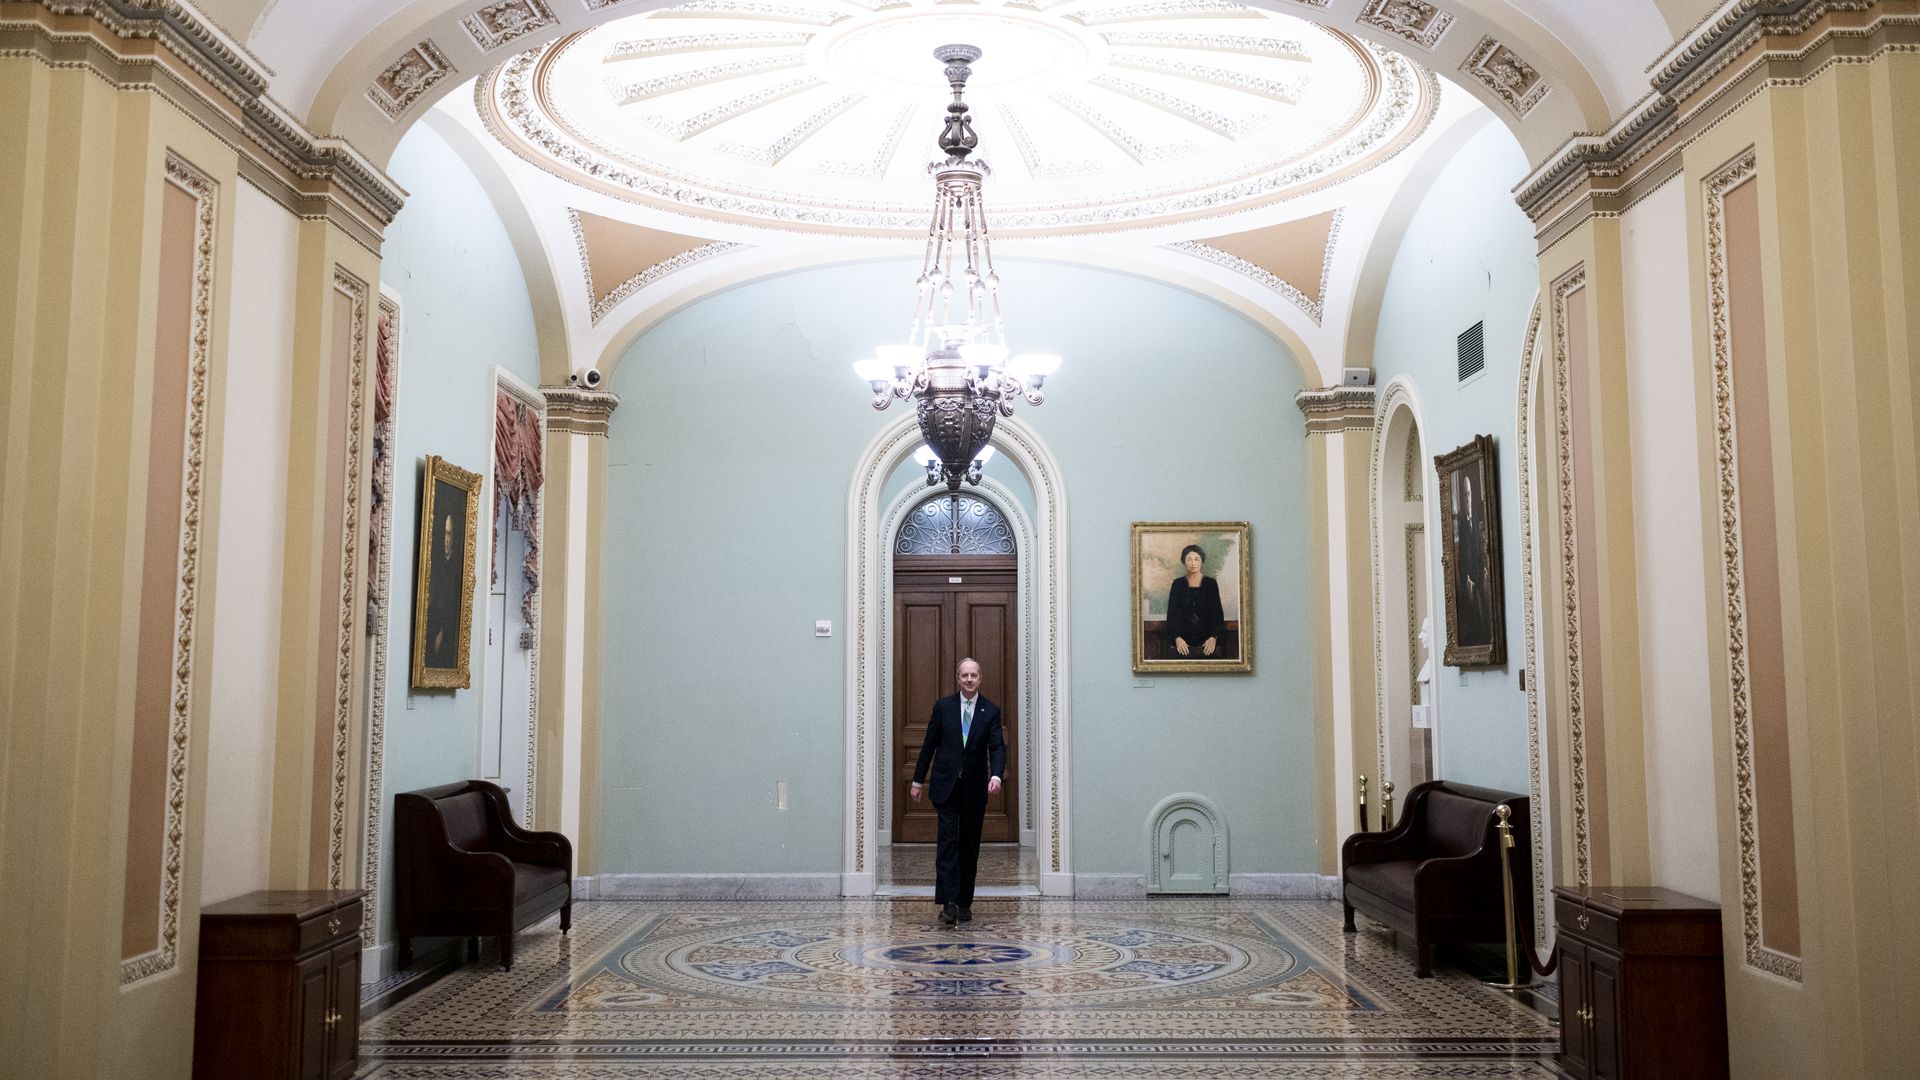 In this image, a man walks in a doorway on Capitol Hill.